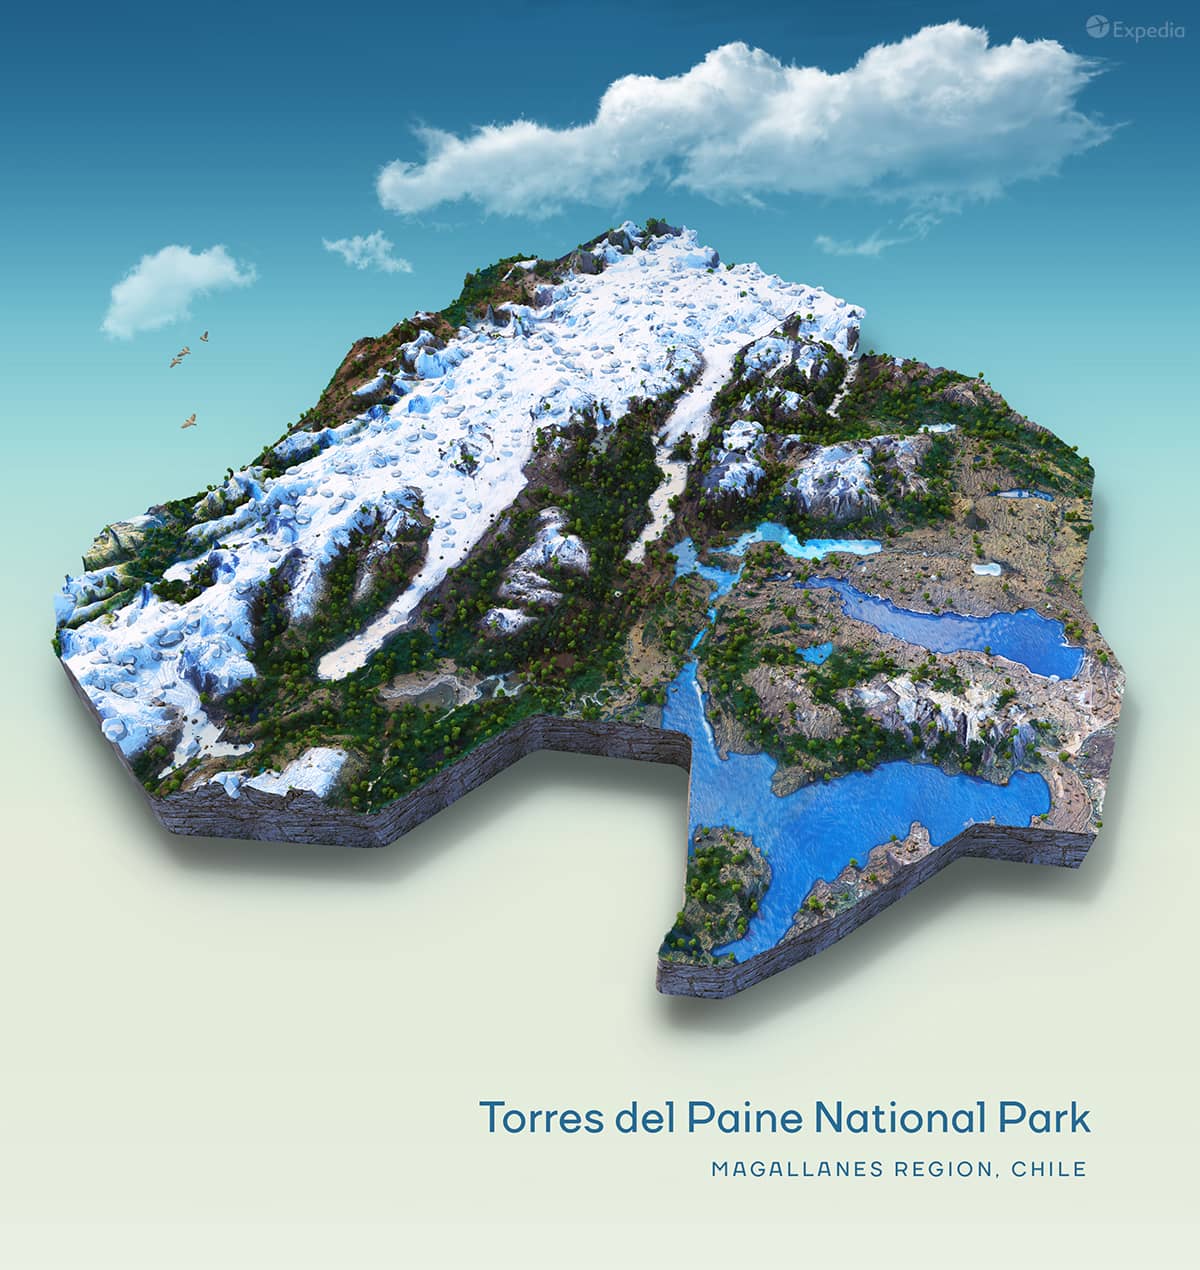 A creative topographic map rendering of Torres del Paine National Park in Chile